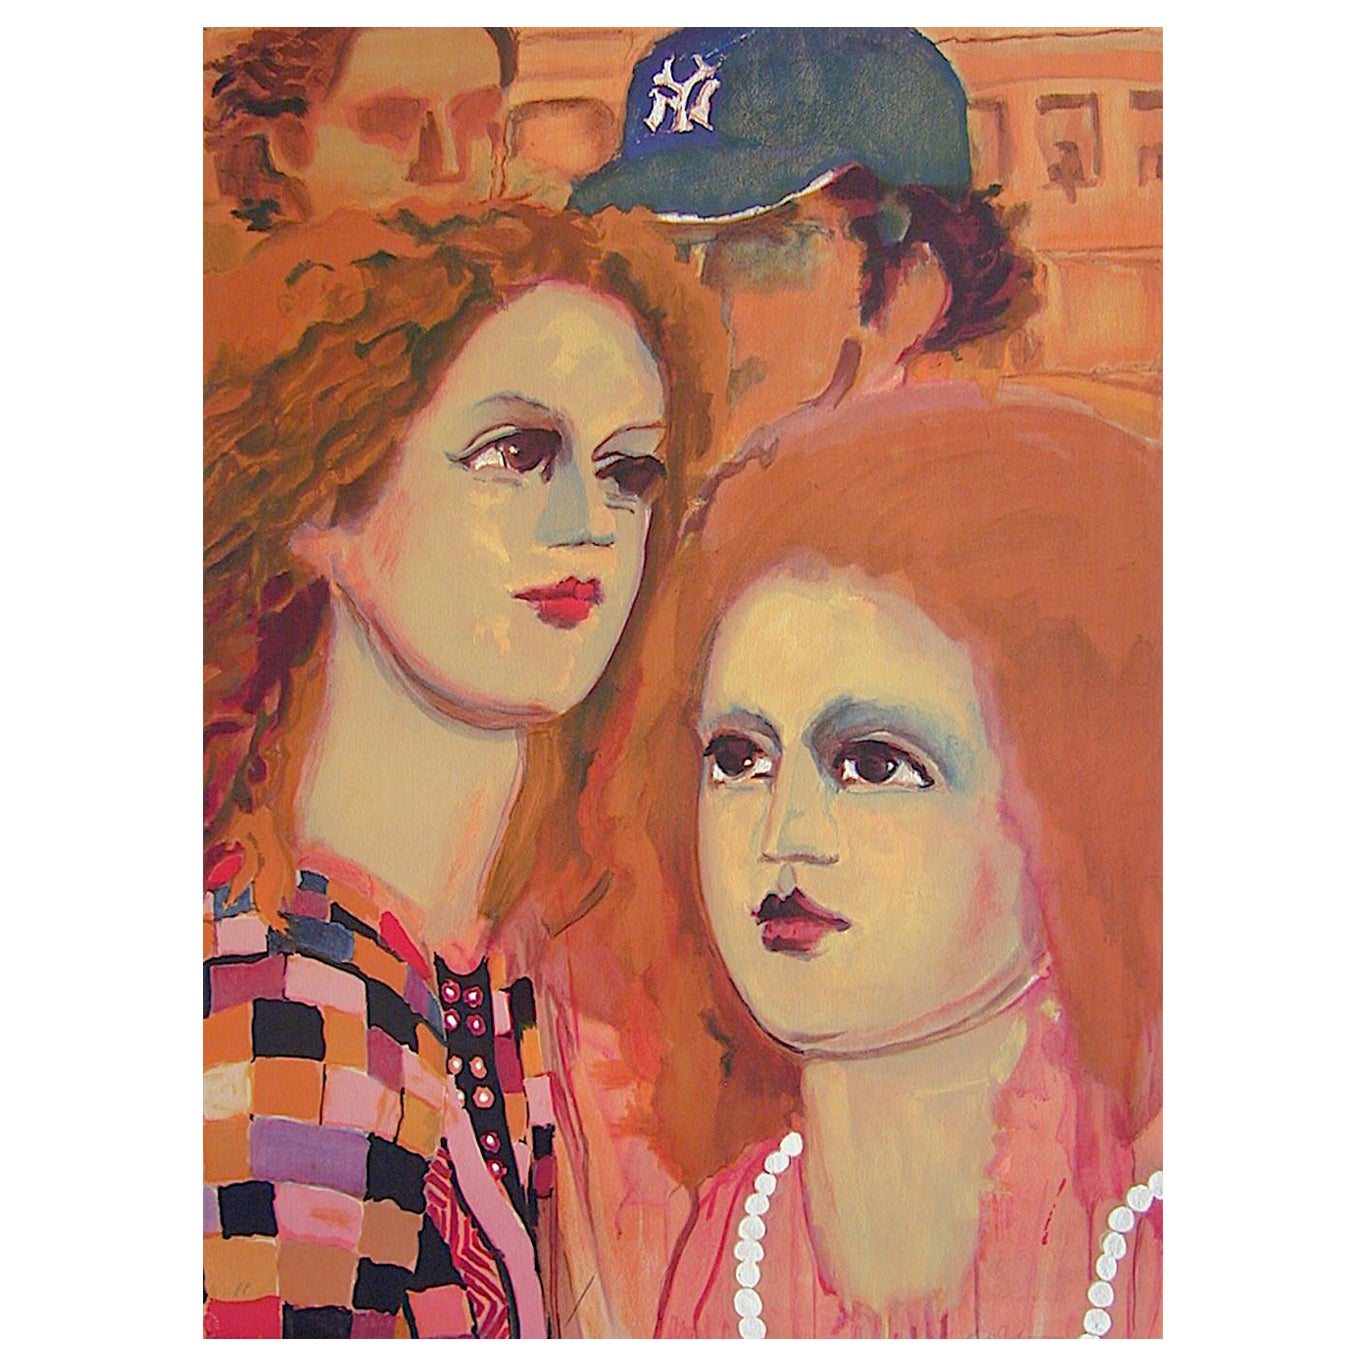 Lester Johnson Figurative Print - NY SCENE: FACES Signed Lithograph, Portrait Women Red Hair, Man Blue Yankee Cap